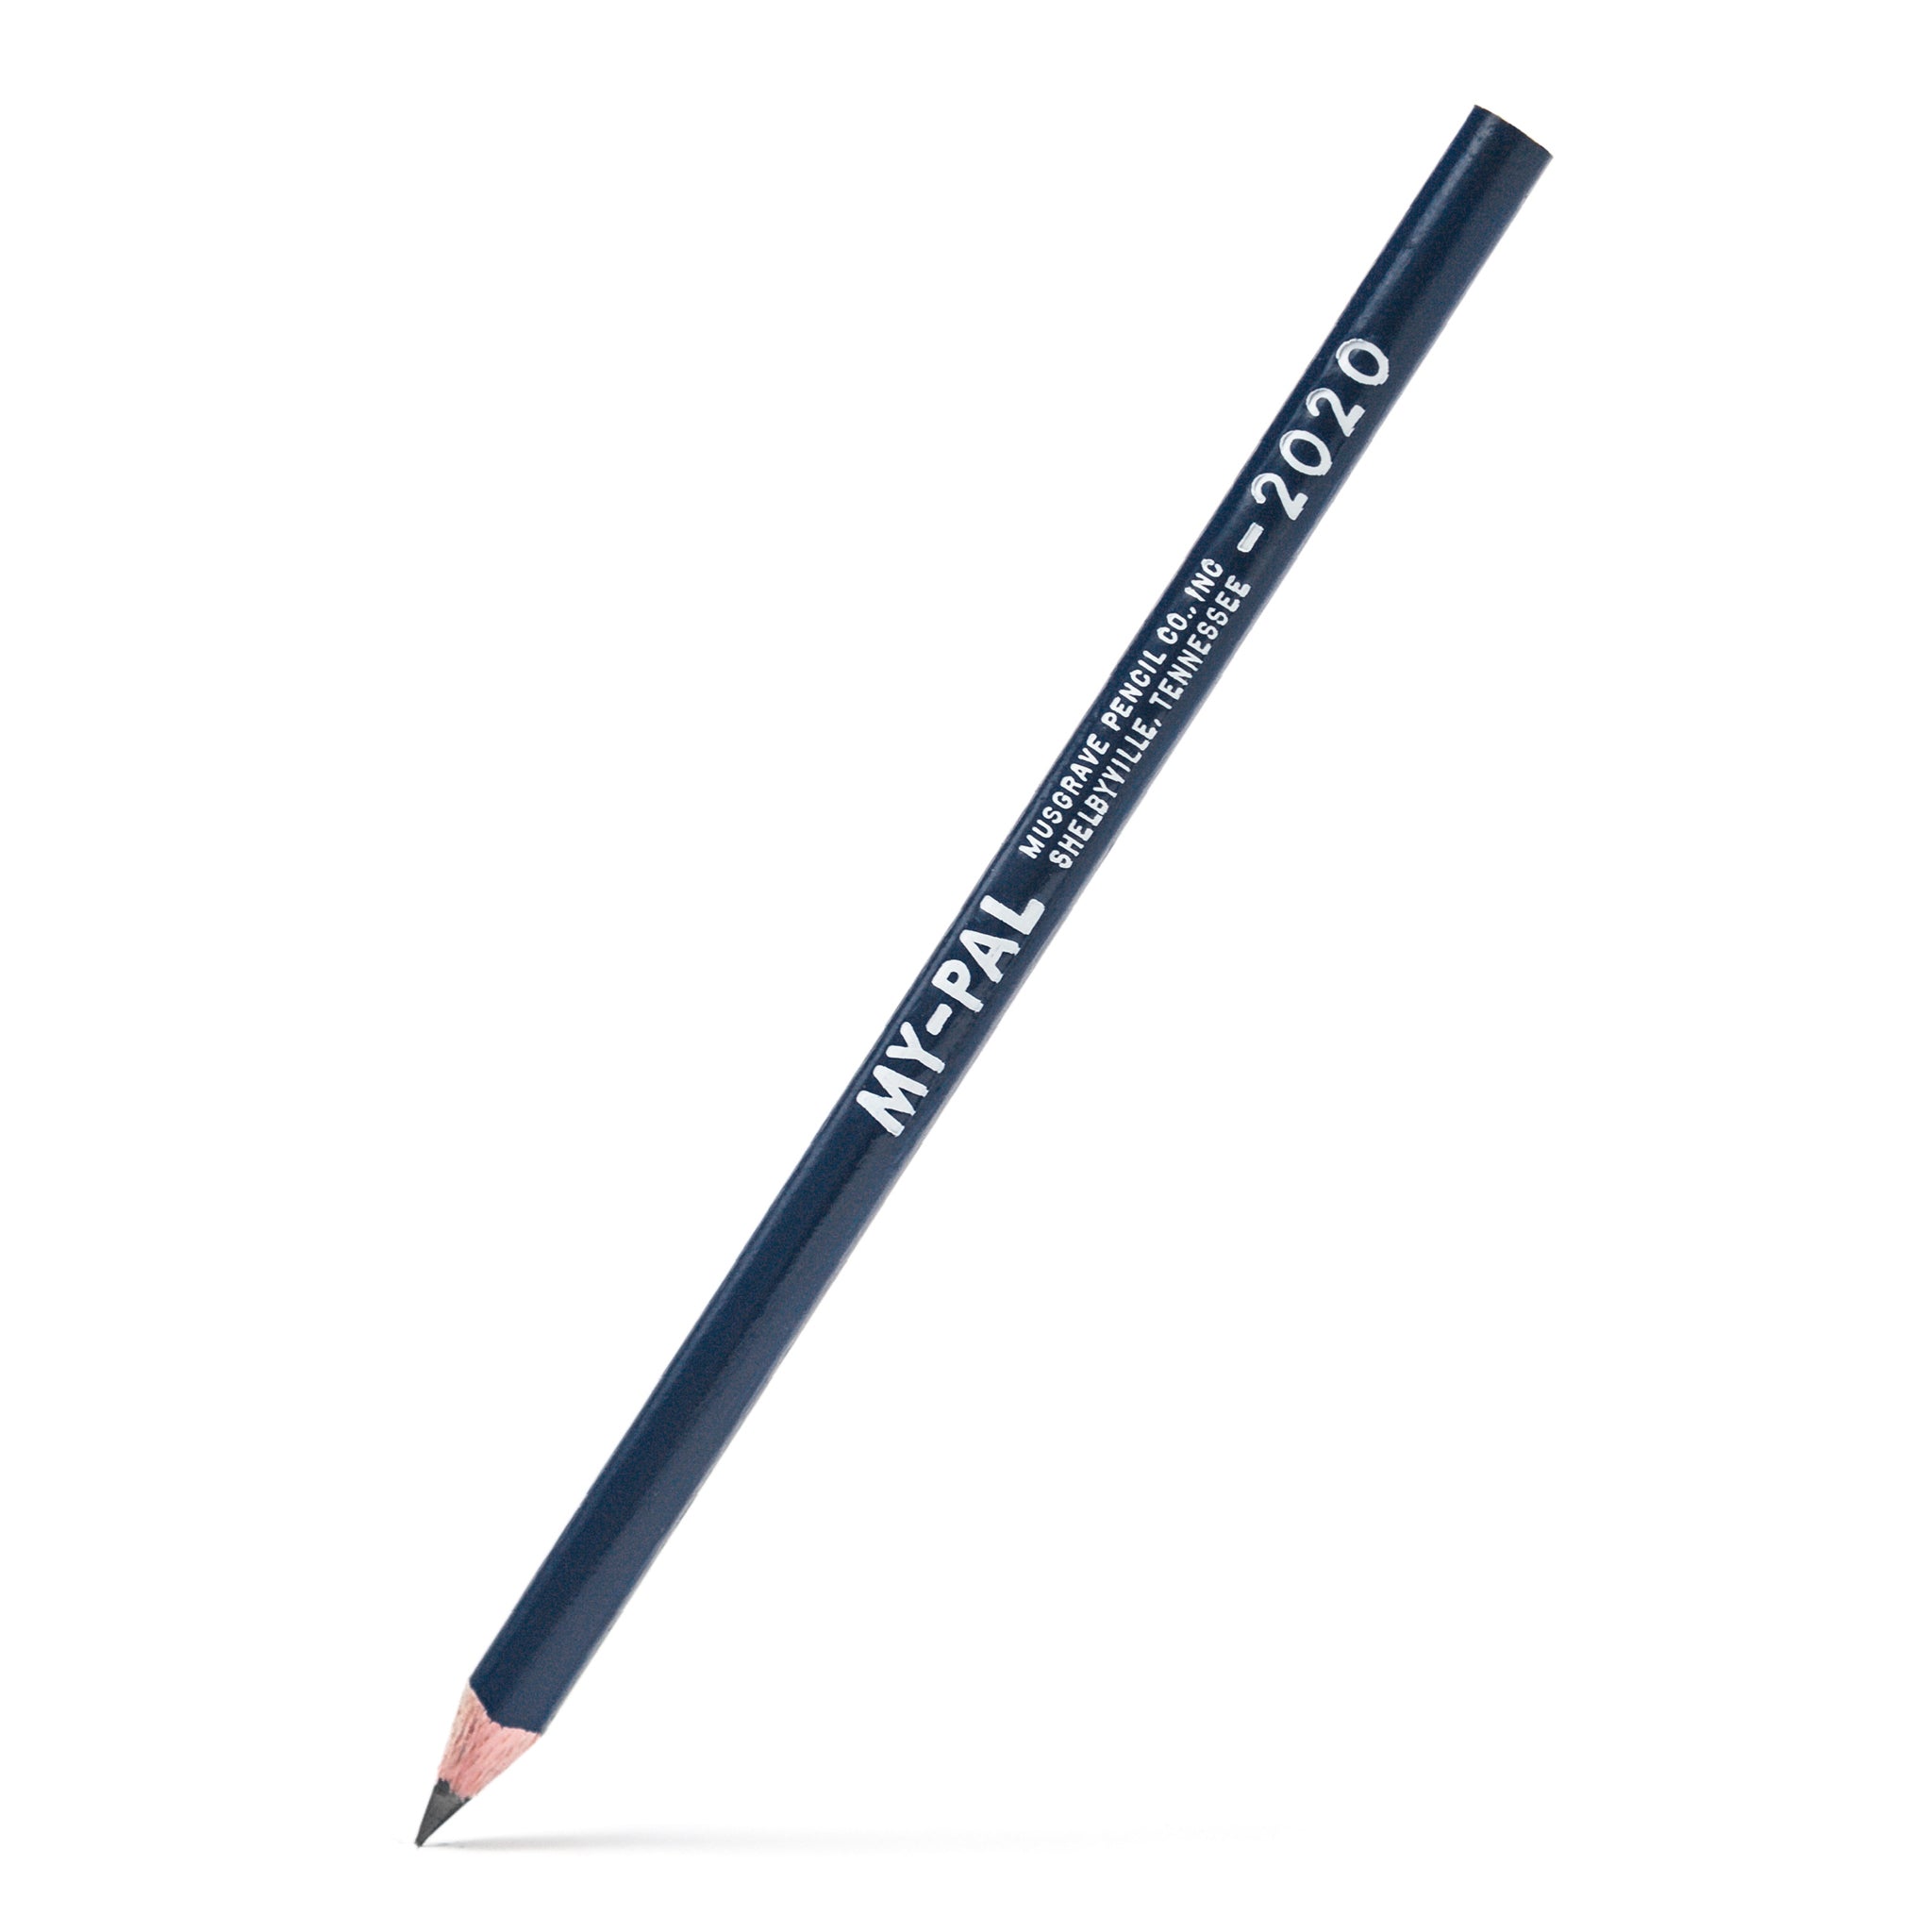 My-Pal 2020 Jumbo Round Pencil by Musgrave Pencil Company